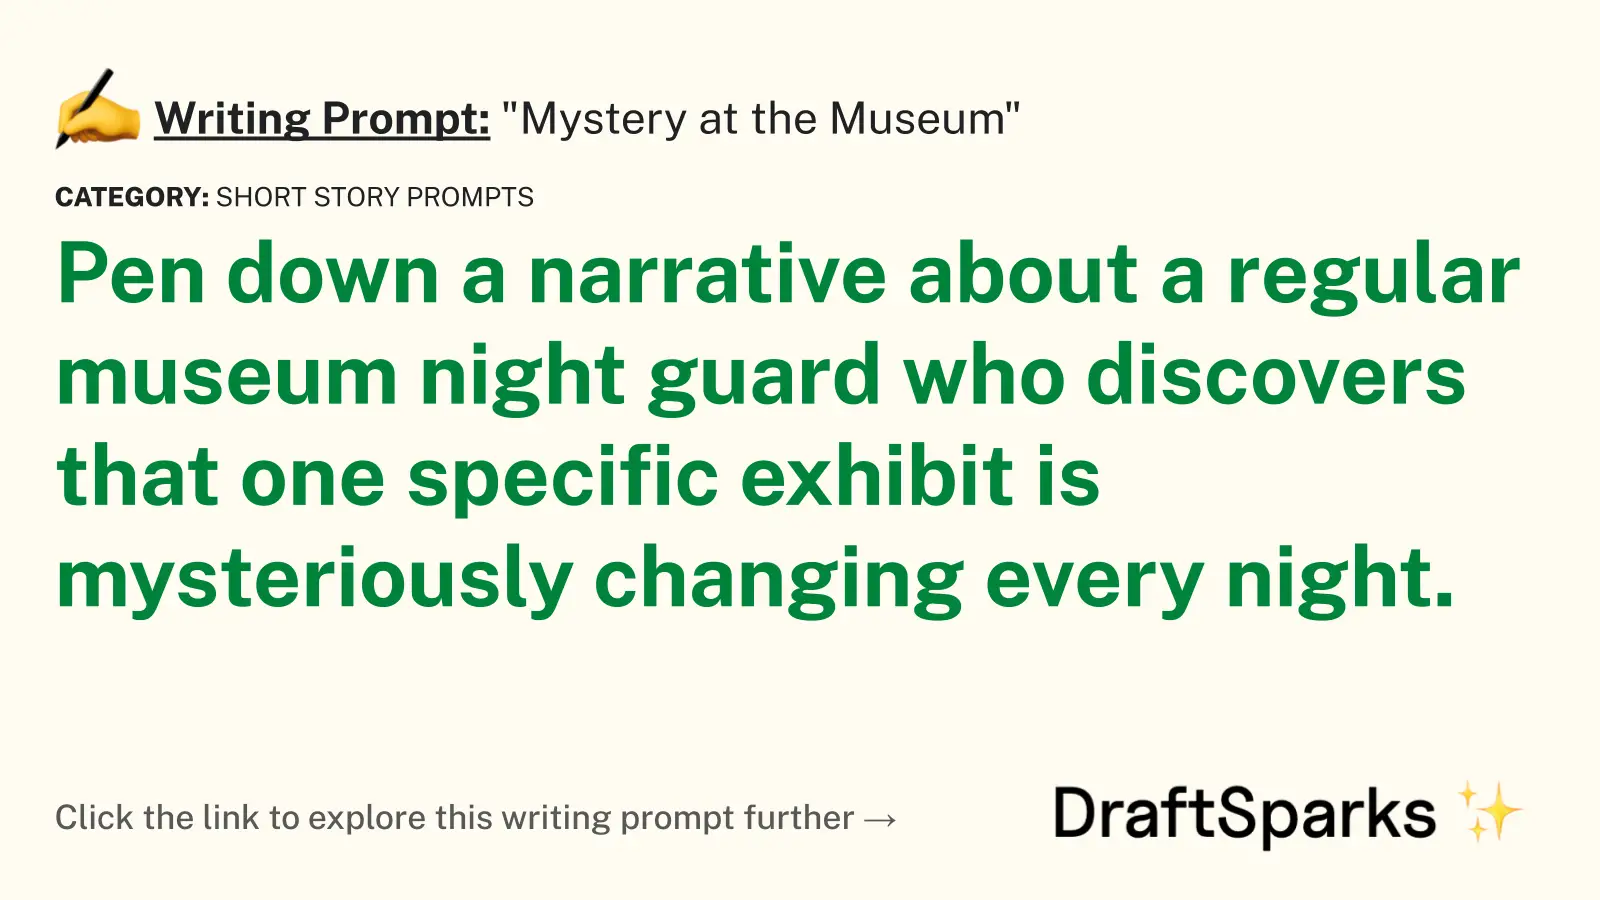 “Mystery at the Museum”